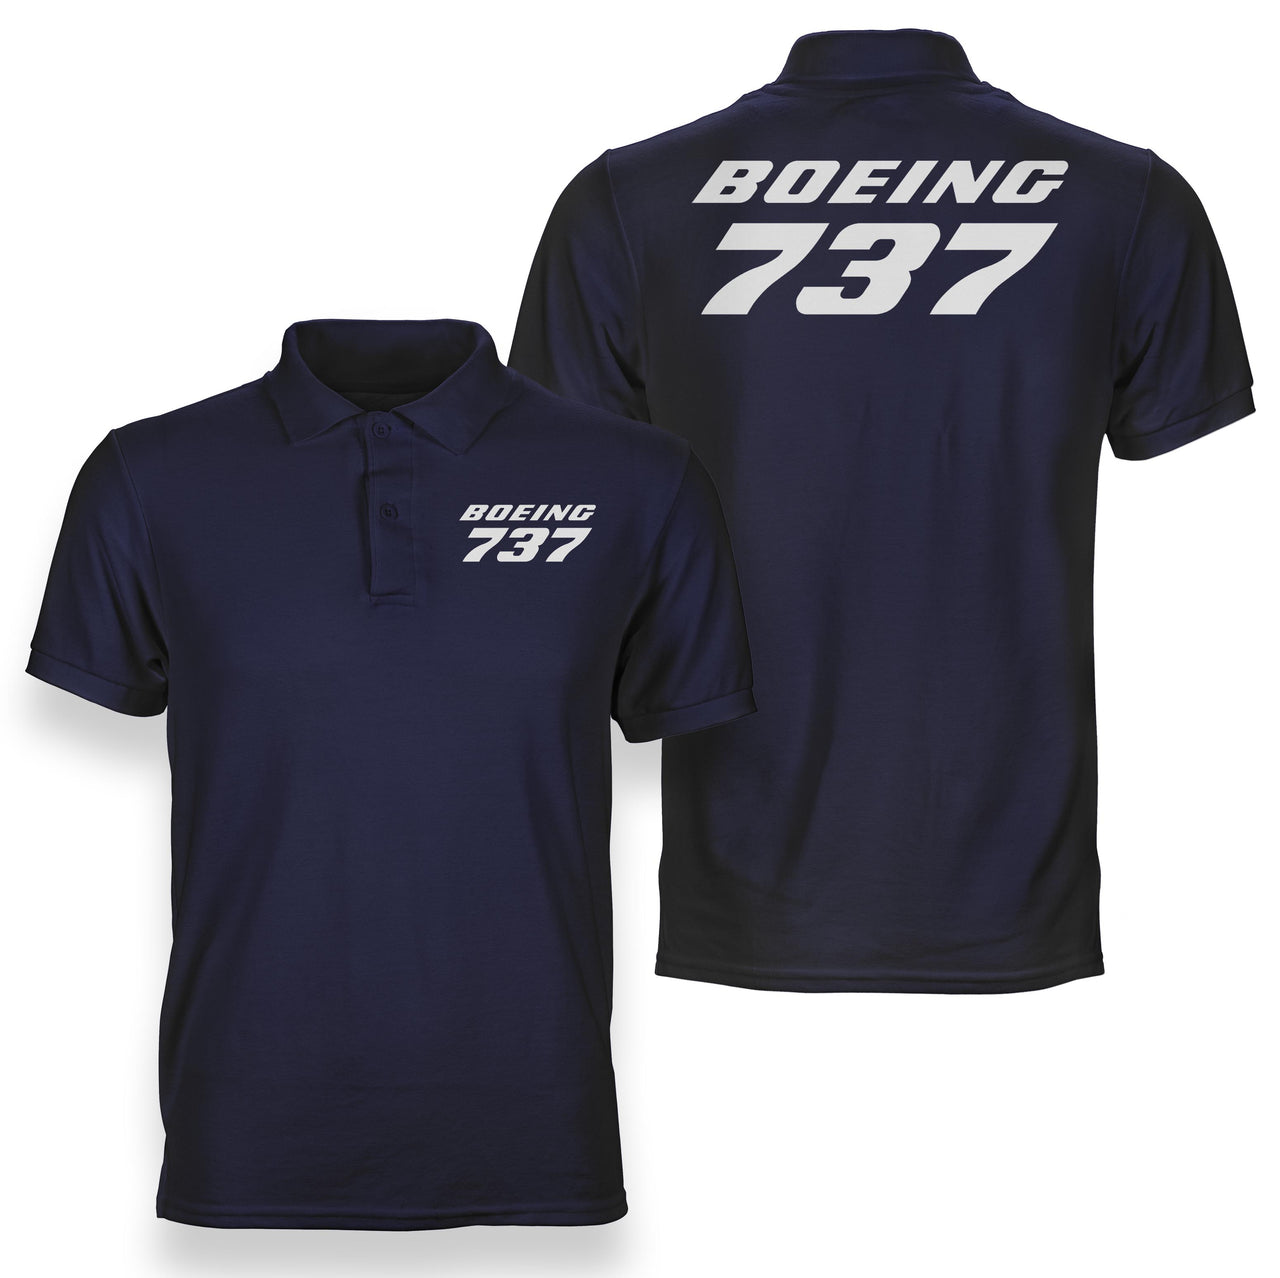 Boeing 737 & Text Designed Double Side Polo T-Shirts